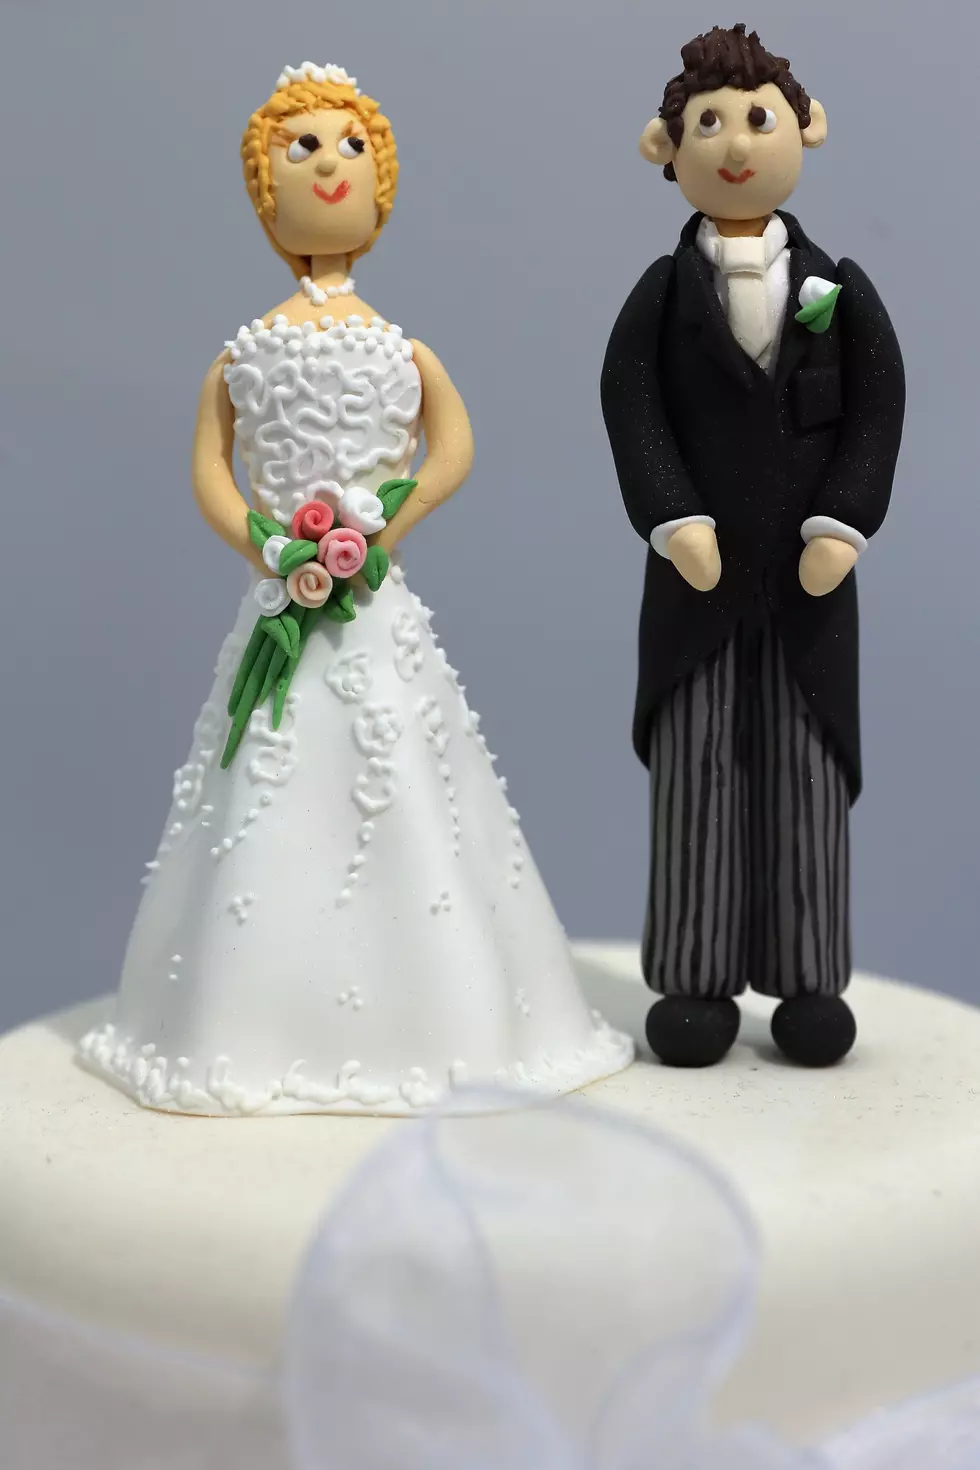 &#8220;1/2 Of Marriages Fail&#8221; They Say.  Not Anymore!